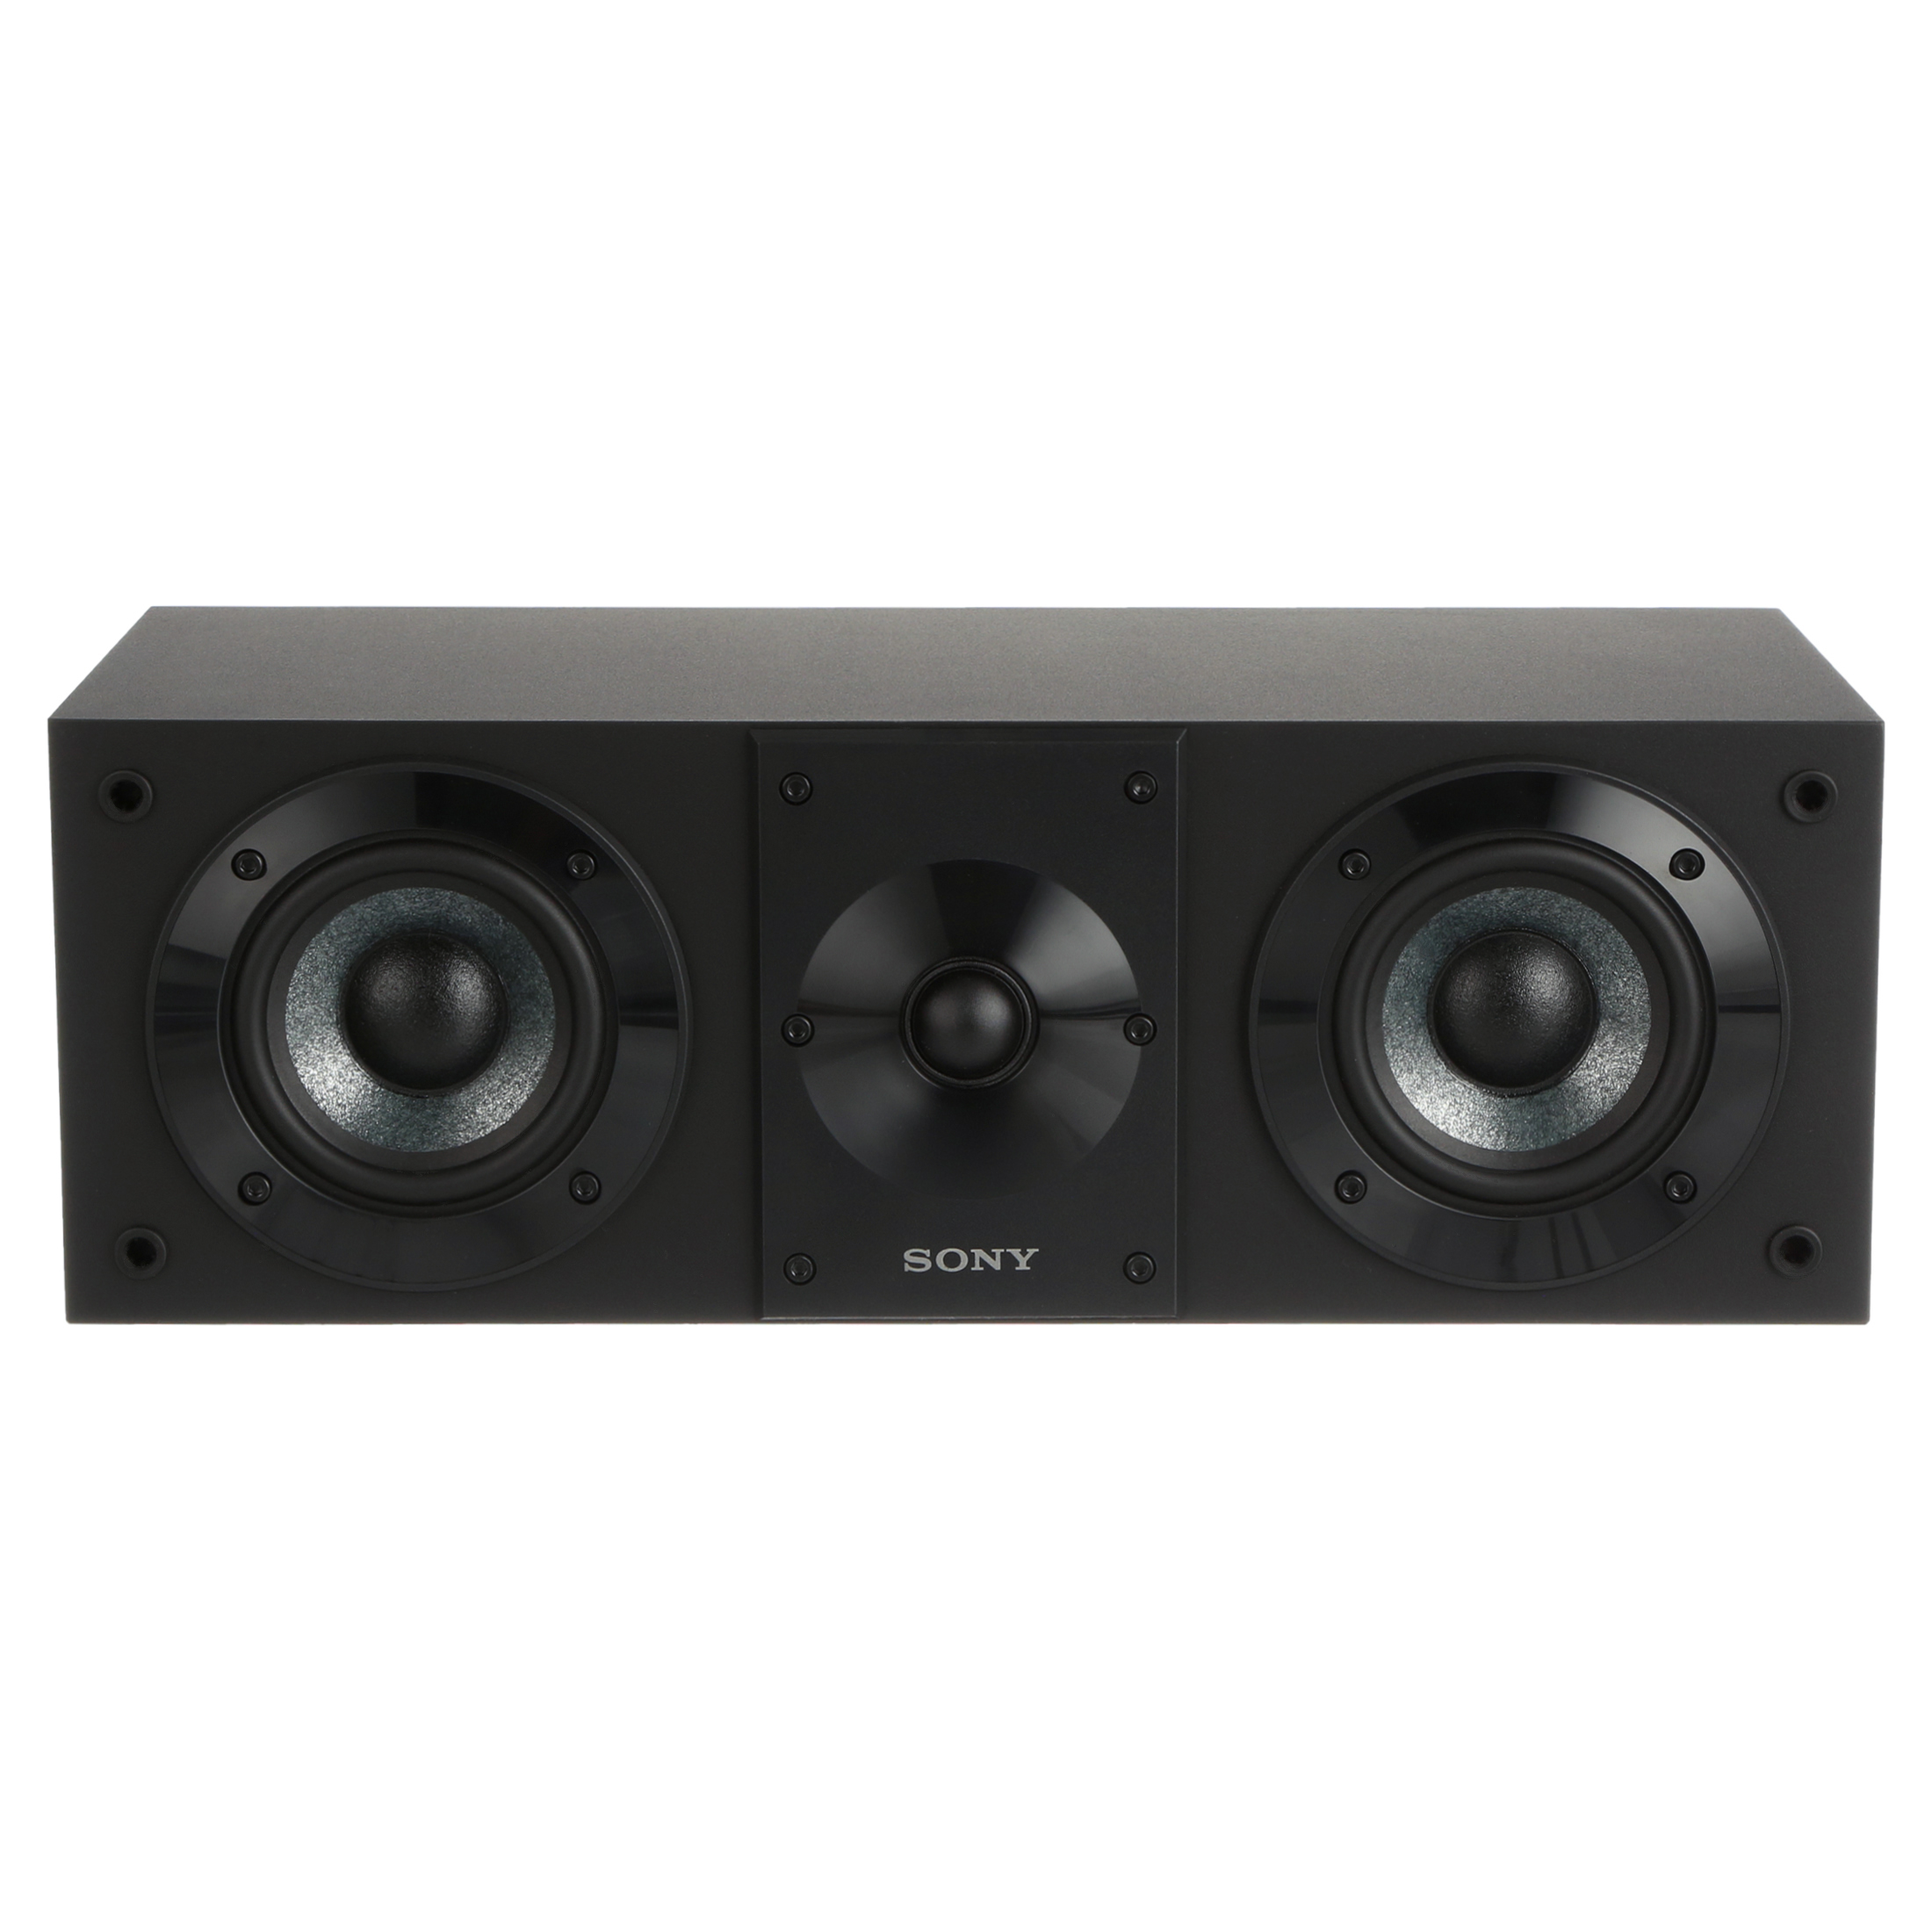 Sony SSCS8 2-Way 3-Driver Center Channel Speaker - Black - image 2 of 5